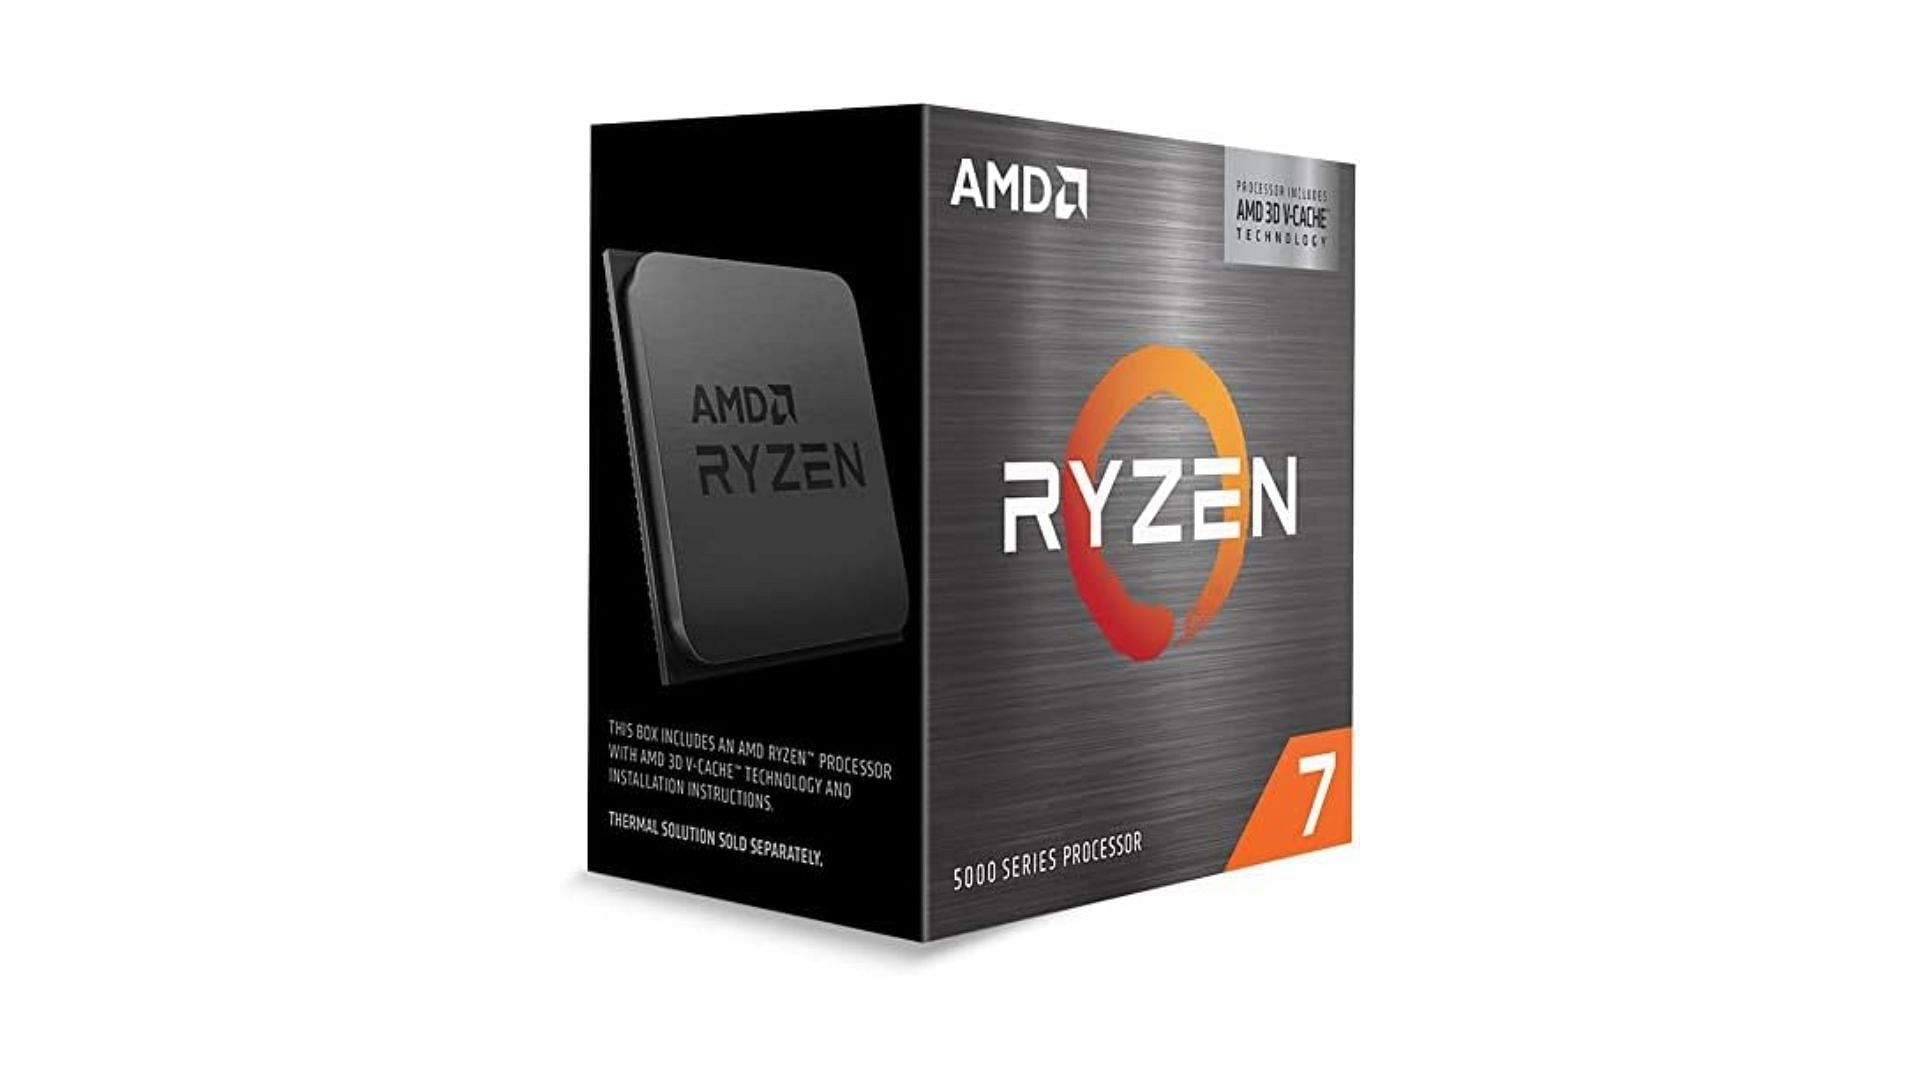 The AMD Ryzen 7 5800X3D and the 5700X3D are designed for gaming (Image via Amazon)